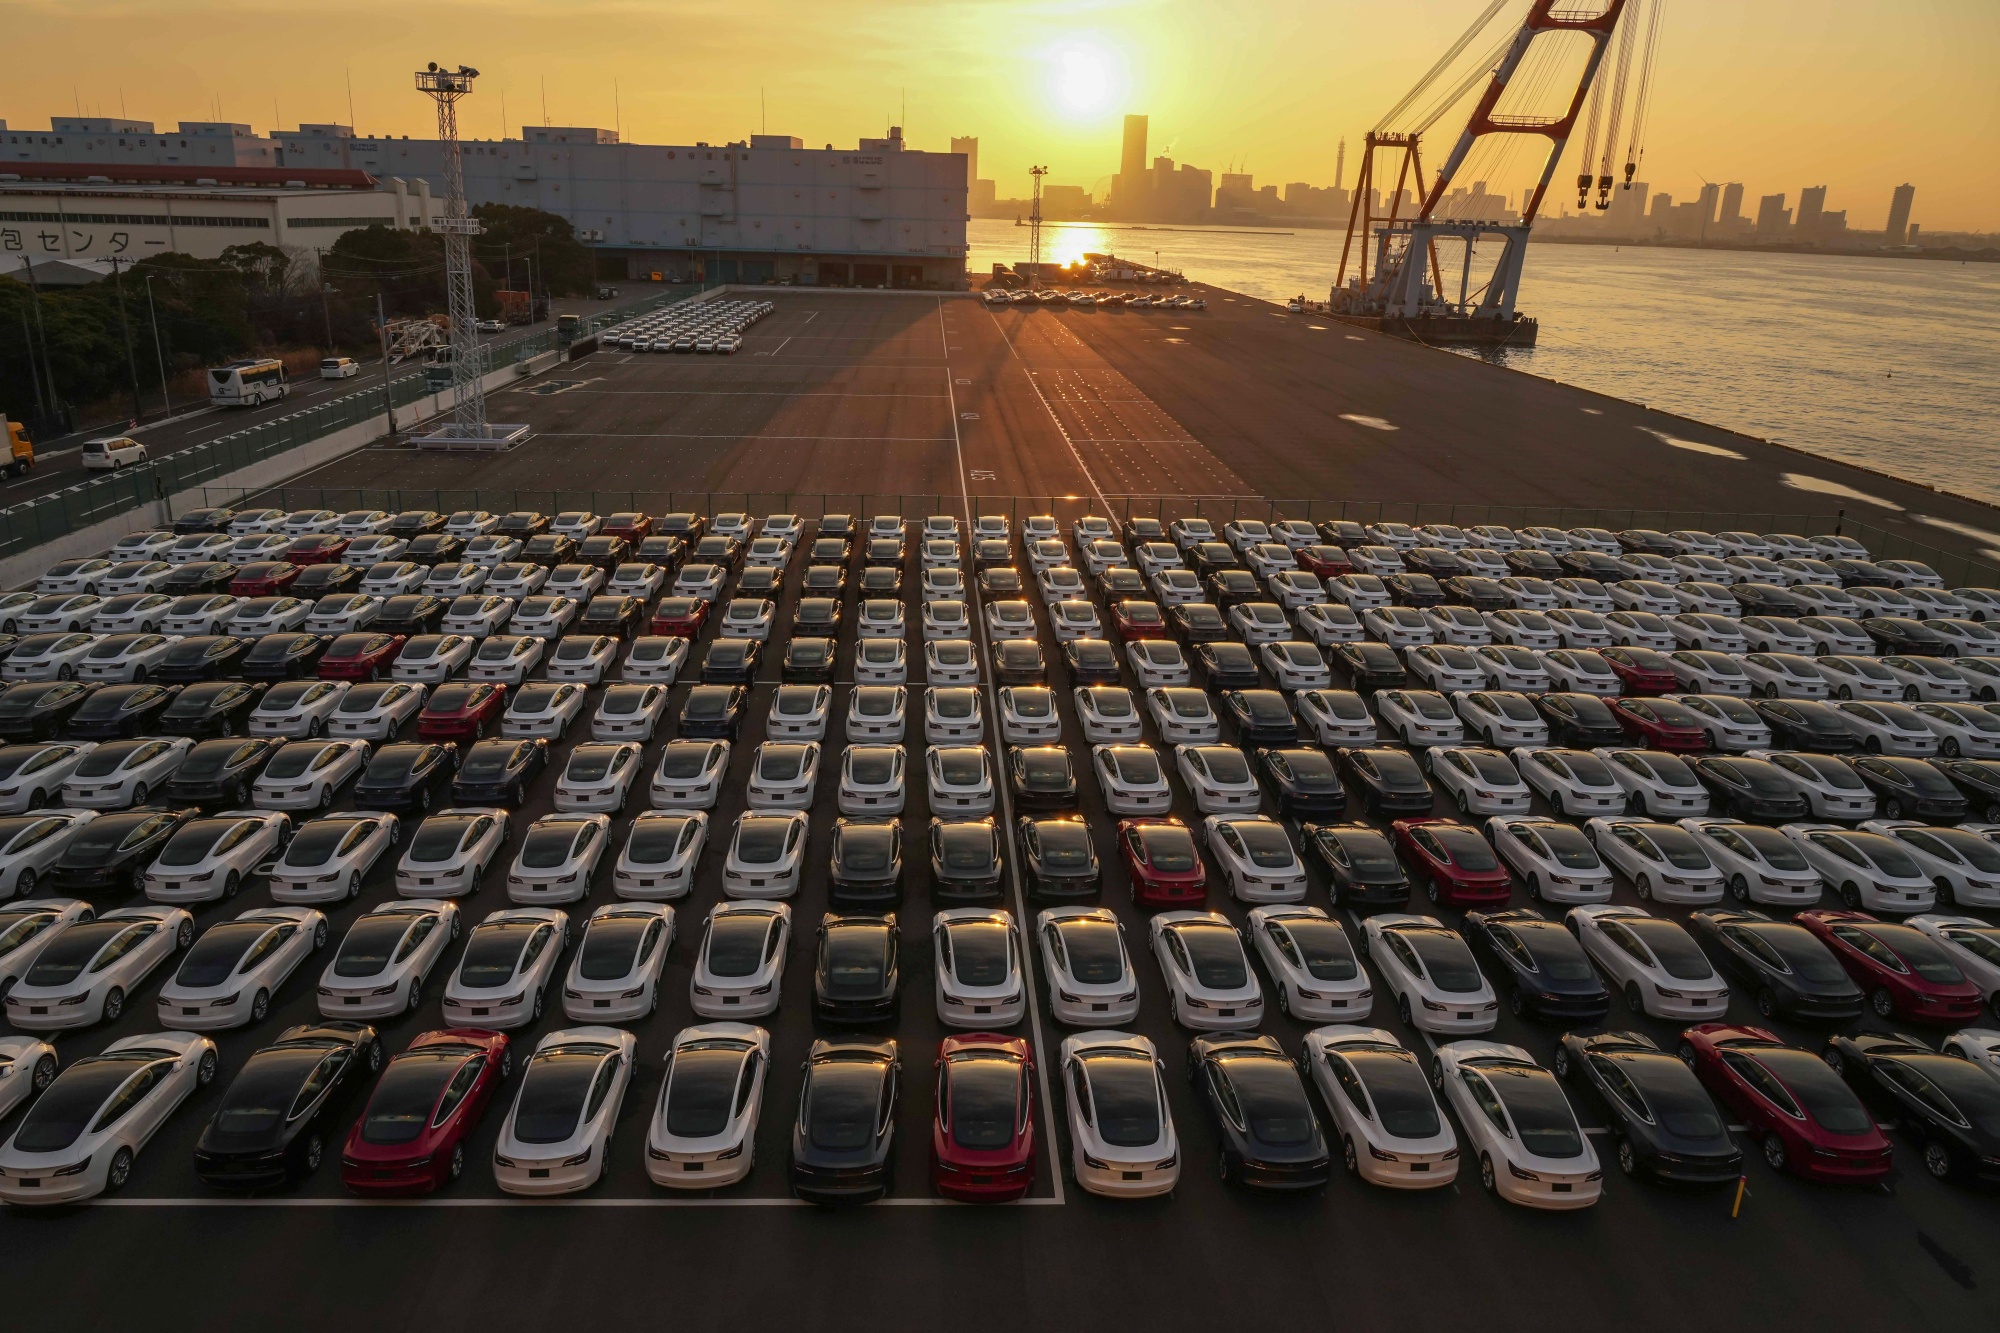 Tesla Inc. vehicles in a parking lot after arriving at a port in Yokohama, Japan, on Monday, Feb. 14, 2022. Japan is scheduled to release trade balance figures on Feb. 17.